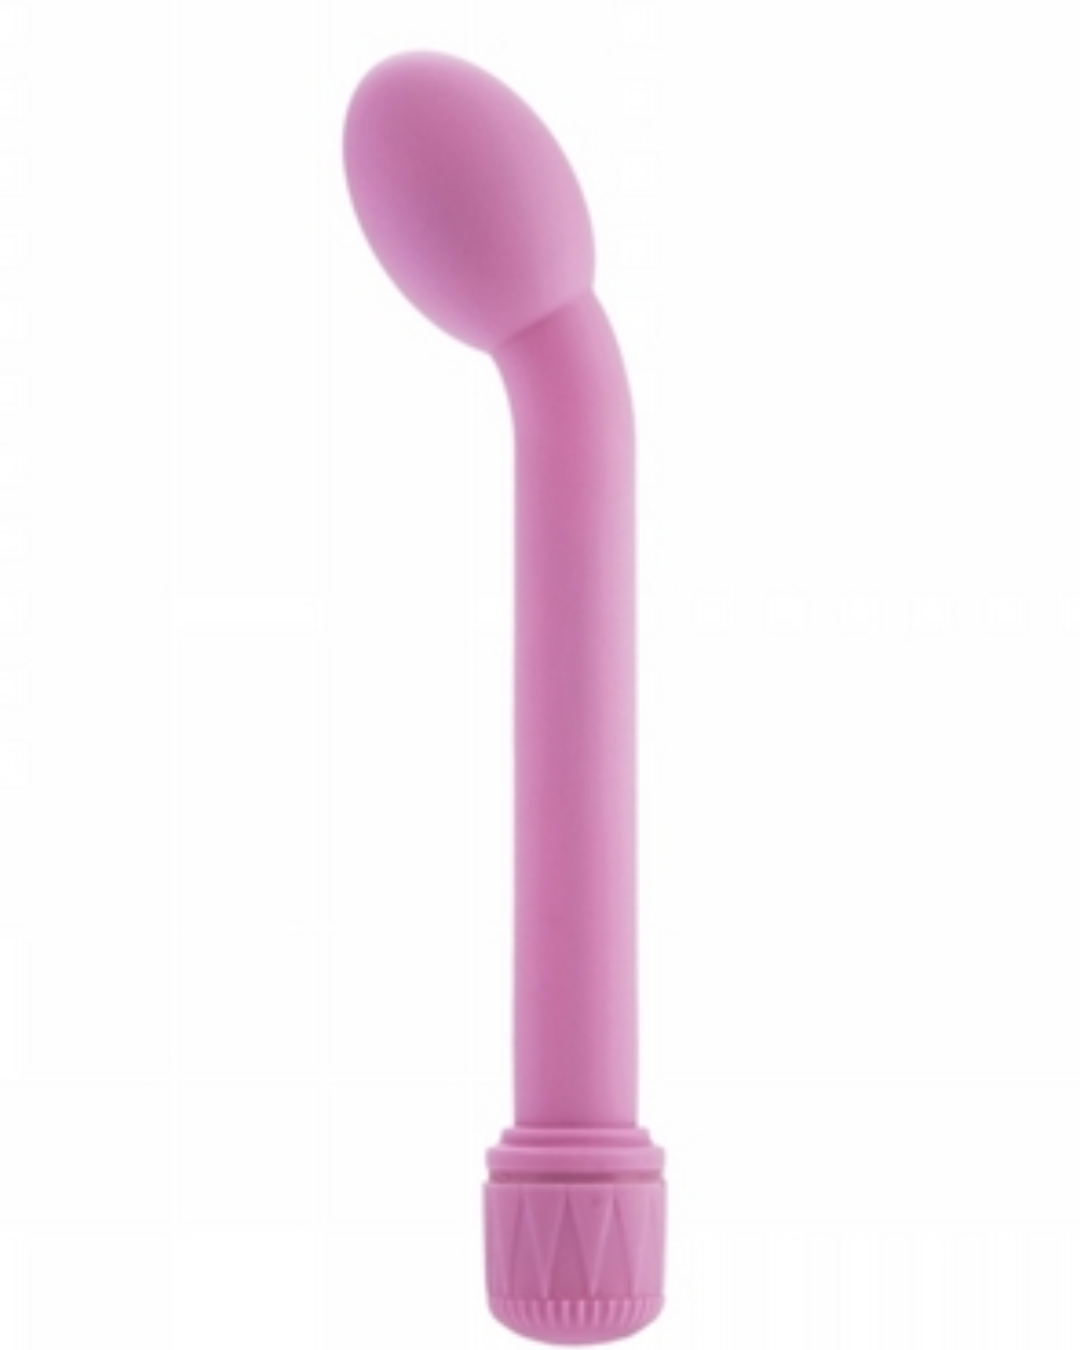 First Time G-Spot Tulip Vibrator by Cal Exotics - Assorted Colors pink